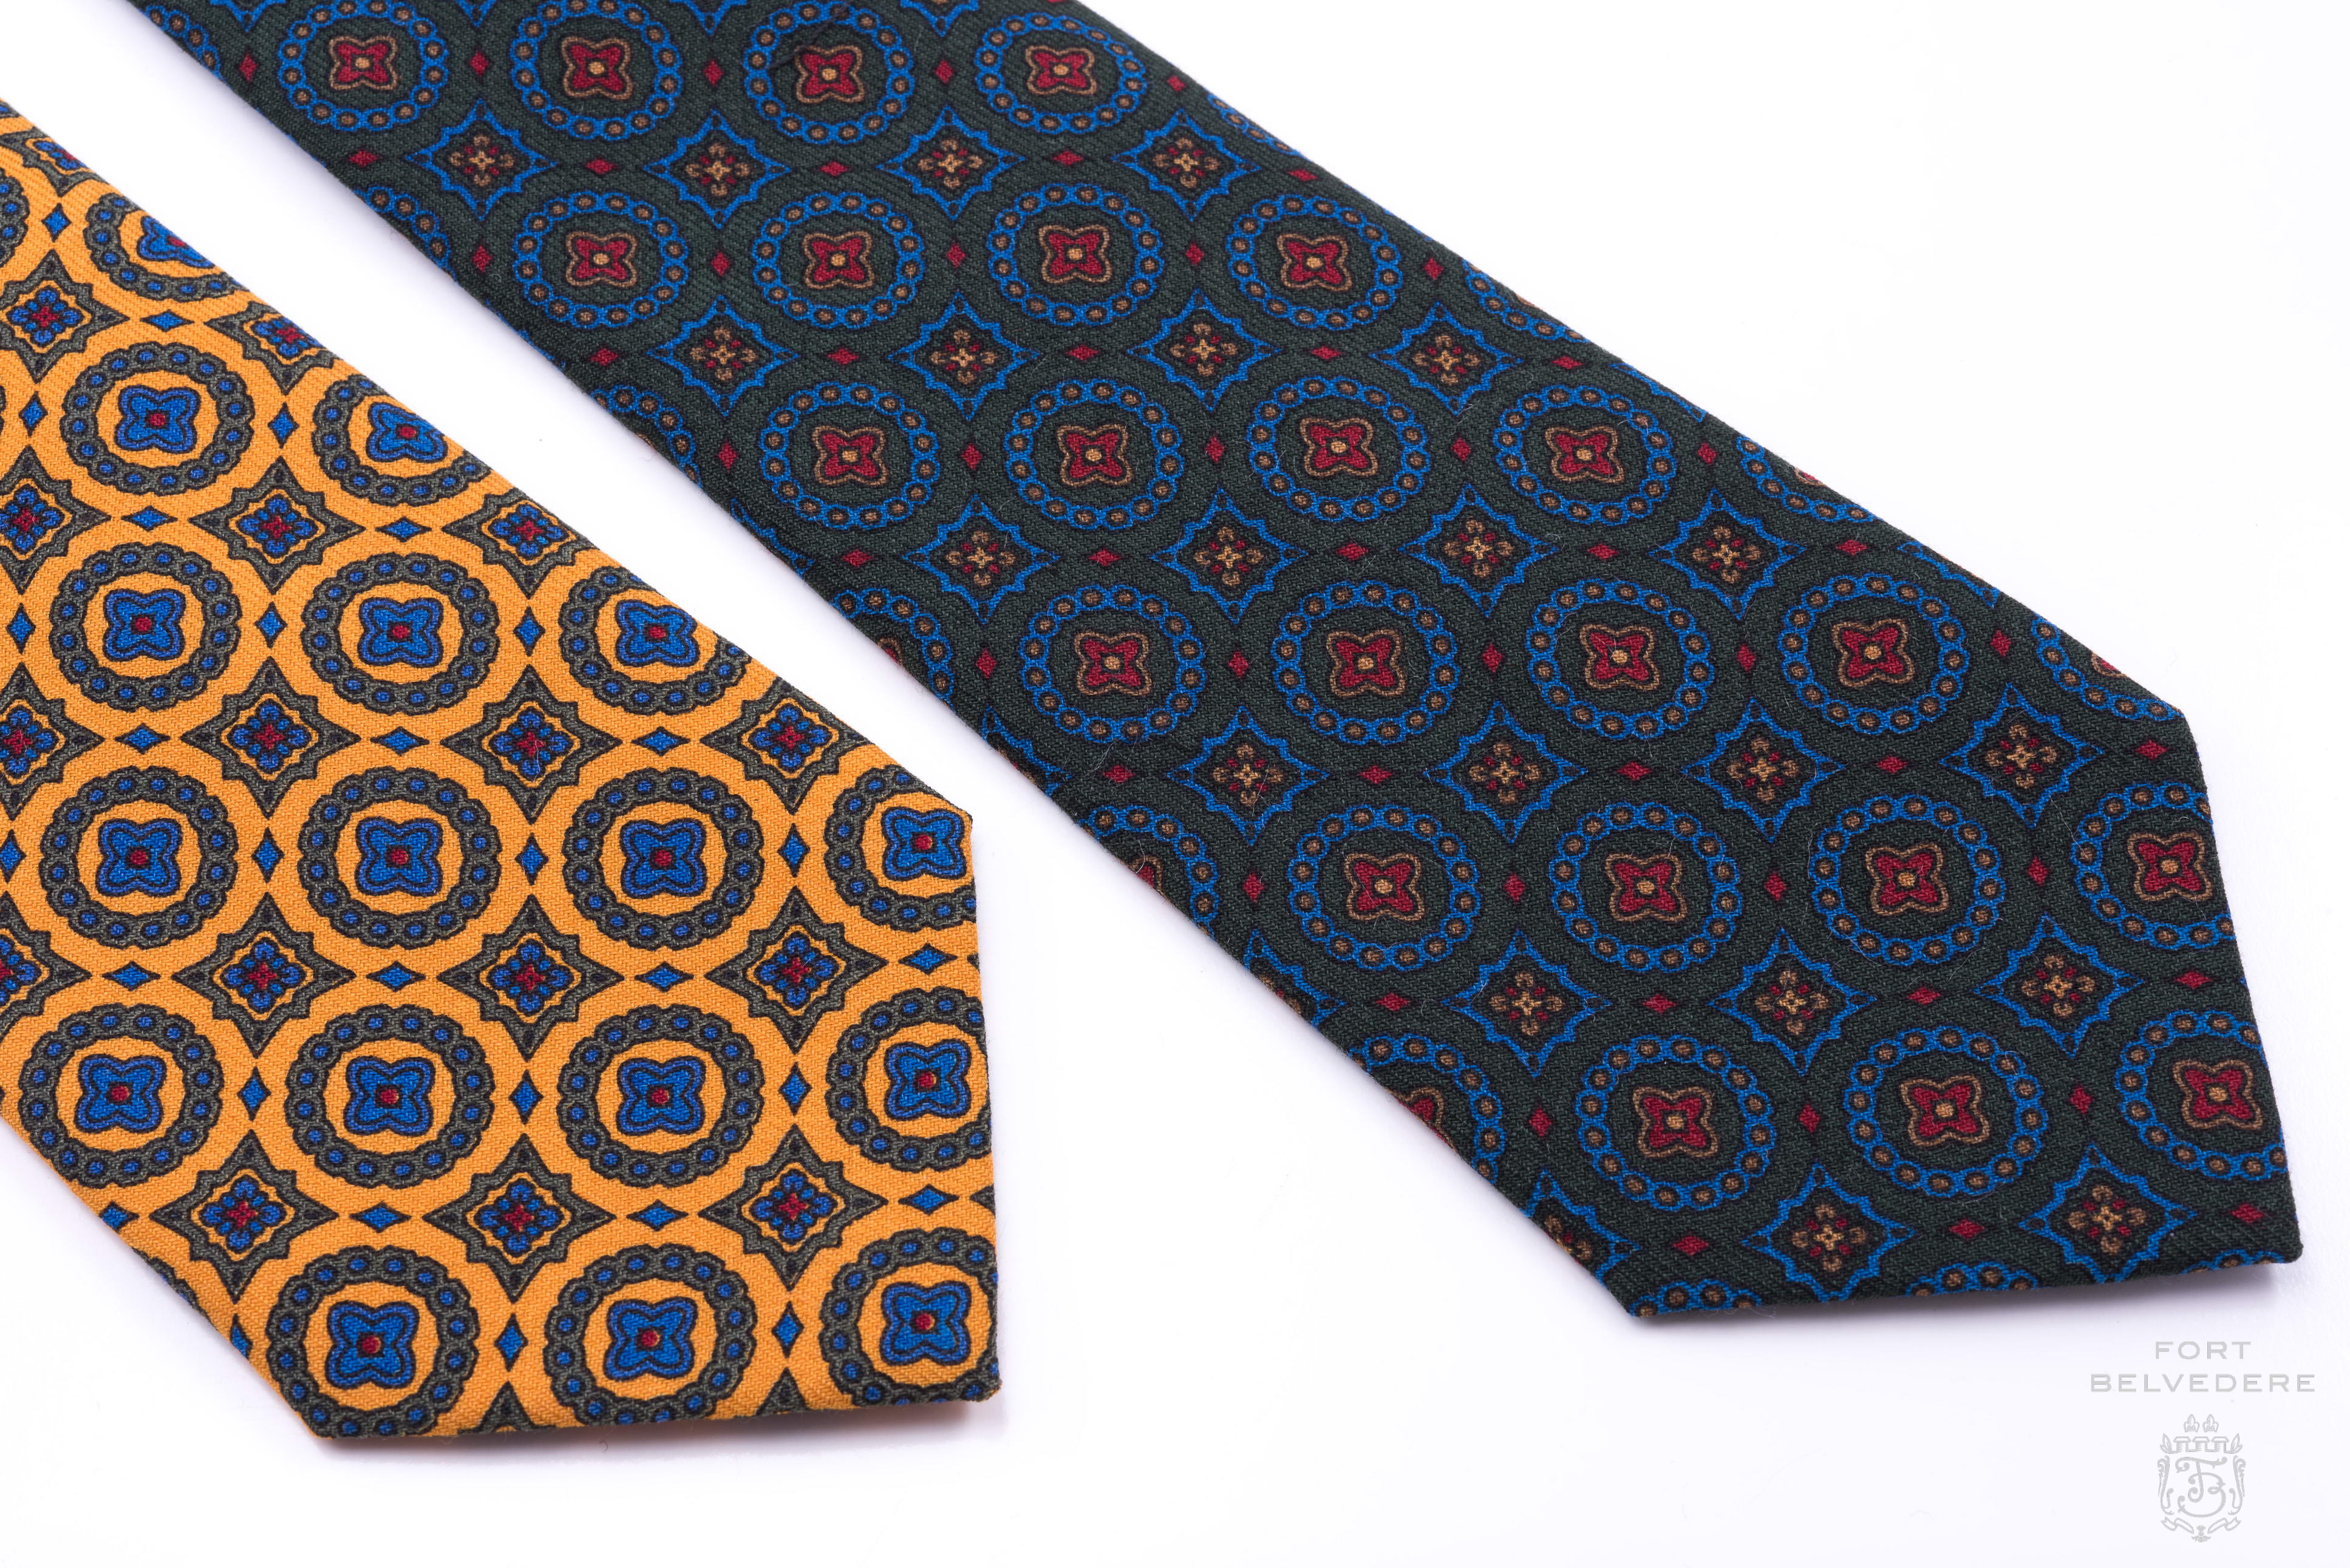 Wool Challis Tie in Sunflower Yellow with Green,Blue & Red Pattern - Fort  Belvedere